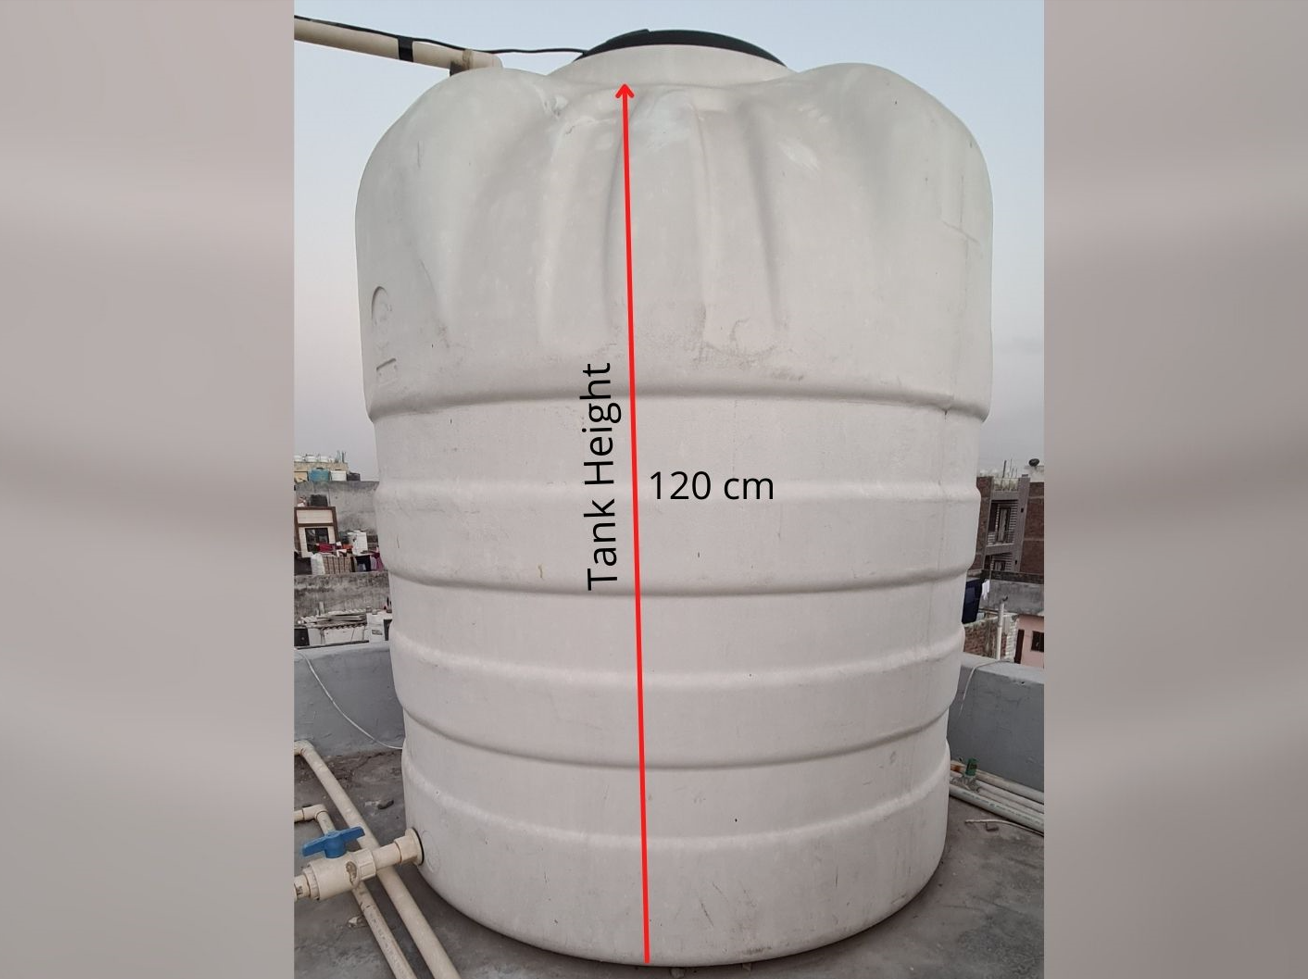 measure tank height to find the depth